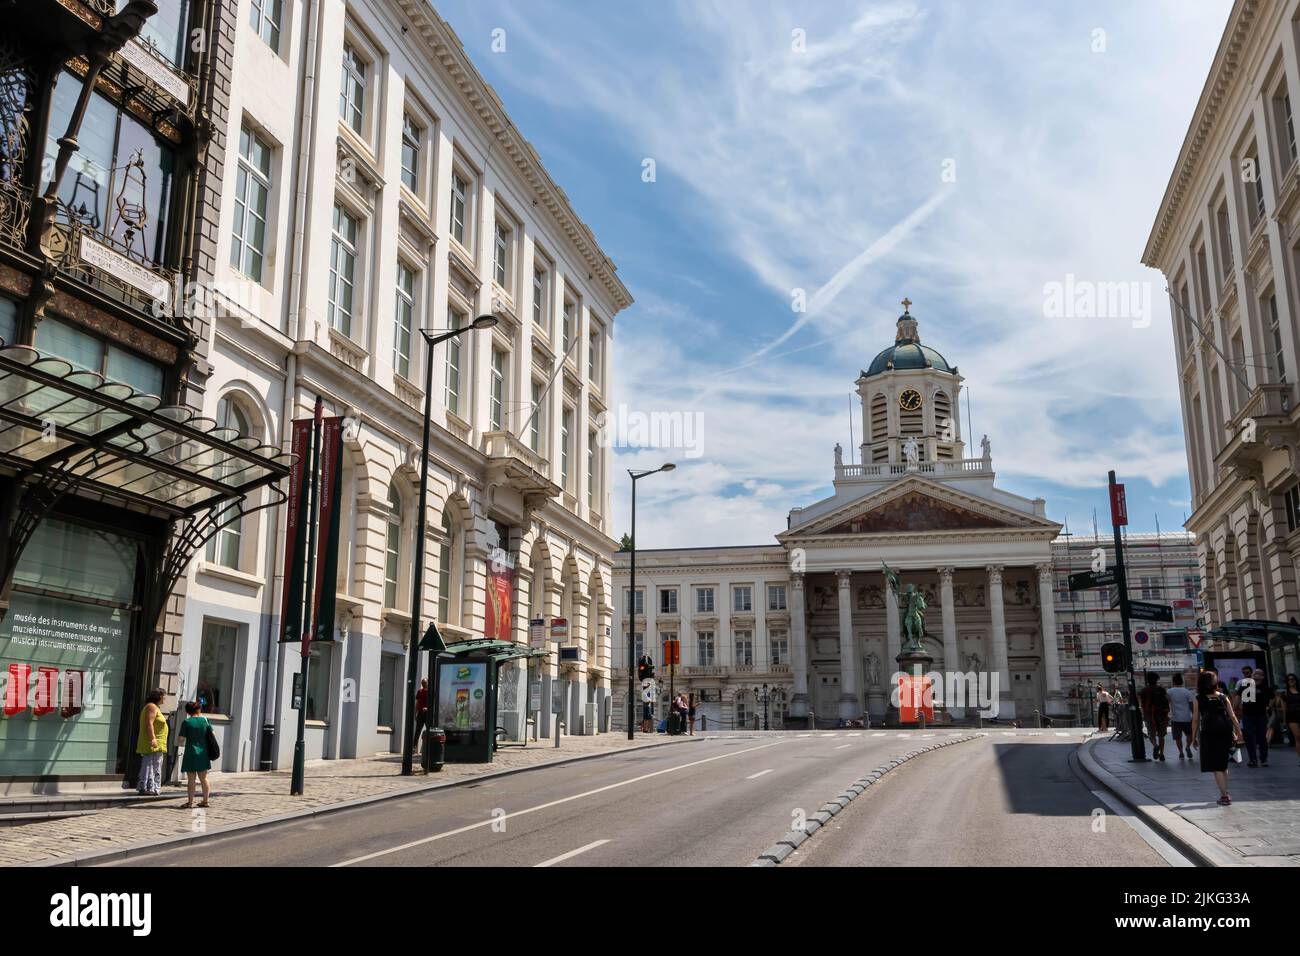 Brussels, Belgium - July 17, 2018: A view of Coudenberg Street, Rue Montagne de la Cour and the Royal Palace Stock Photo